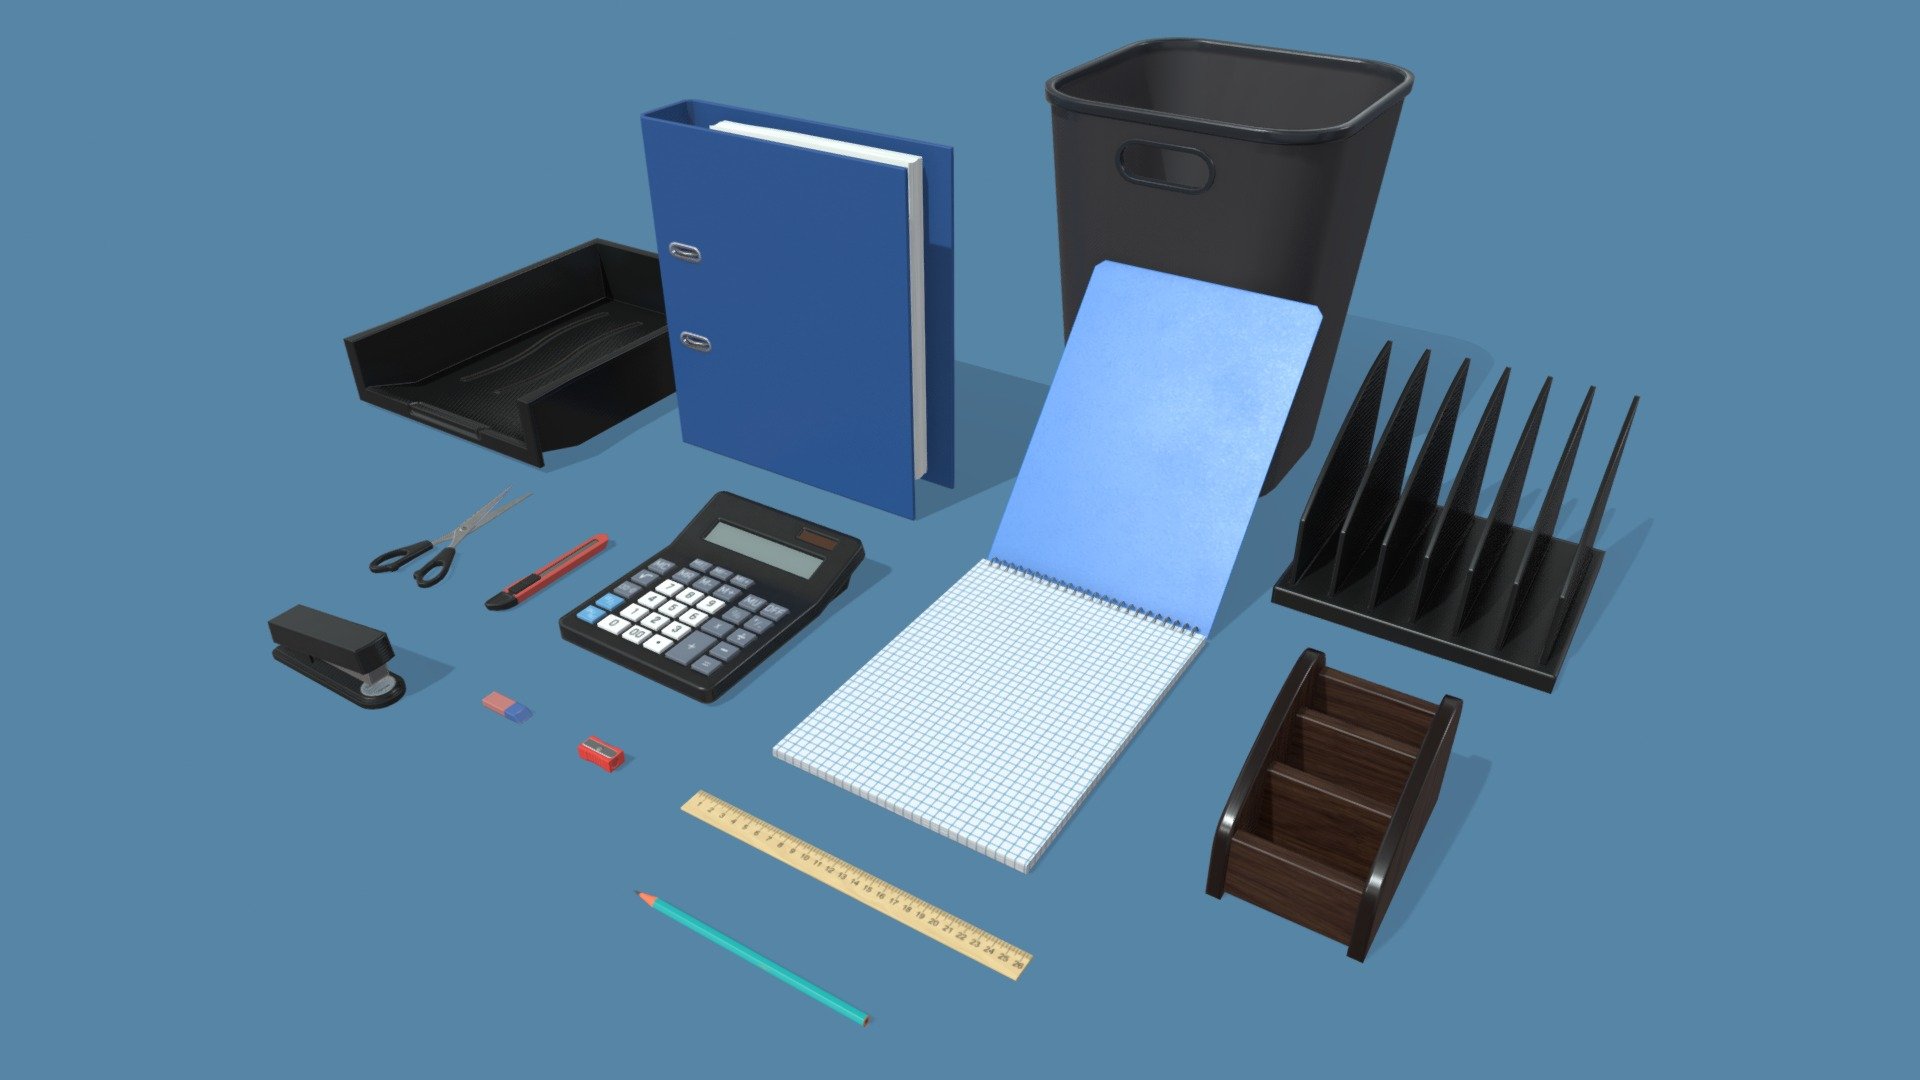 Game ready low-poly Office Supplies models collection with PBR textures for game engines/renderers.

The collection consists of calculator, box cutter, pencil eraser, notebook, organizer, paper tray, pencil, ring binder, ruler, scissors, pencil sharpener, stapler, sorter paper, trash can.

This product is intended for game/real time/background use. This model is not intended for subdivision. Geometry is triangulated. Model unwrapped manually. All materials and objects named appropriately. Scaled to approximate real world size. Tested in Unreal Engine 4. Tested in Unity. No special plugins needed. .obj and .fbx versions exported from Blender 2.83.

4096x4096 textures in png format:
- General PBR Metallic/Roughness  textures: BaseColor, Metallic, Roughness, Normal, AO;
- Unity Textures: Albedo, MetallicSmoothness, Normal, AO;
- Unreal Engine 4 textures: BaseColor, OcclusionRoughnessMetallic, Normal;
- PBR Specular/Glossiness textures: Diffuse, Specular, Glossiness, Normal, AO 3d model